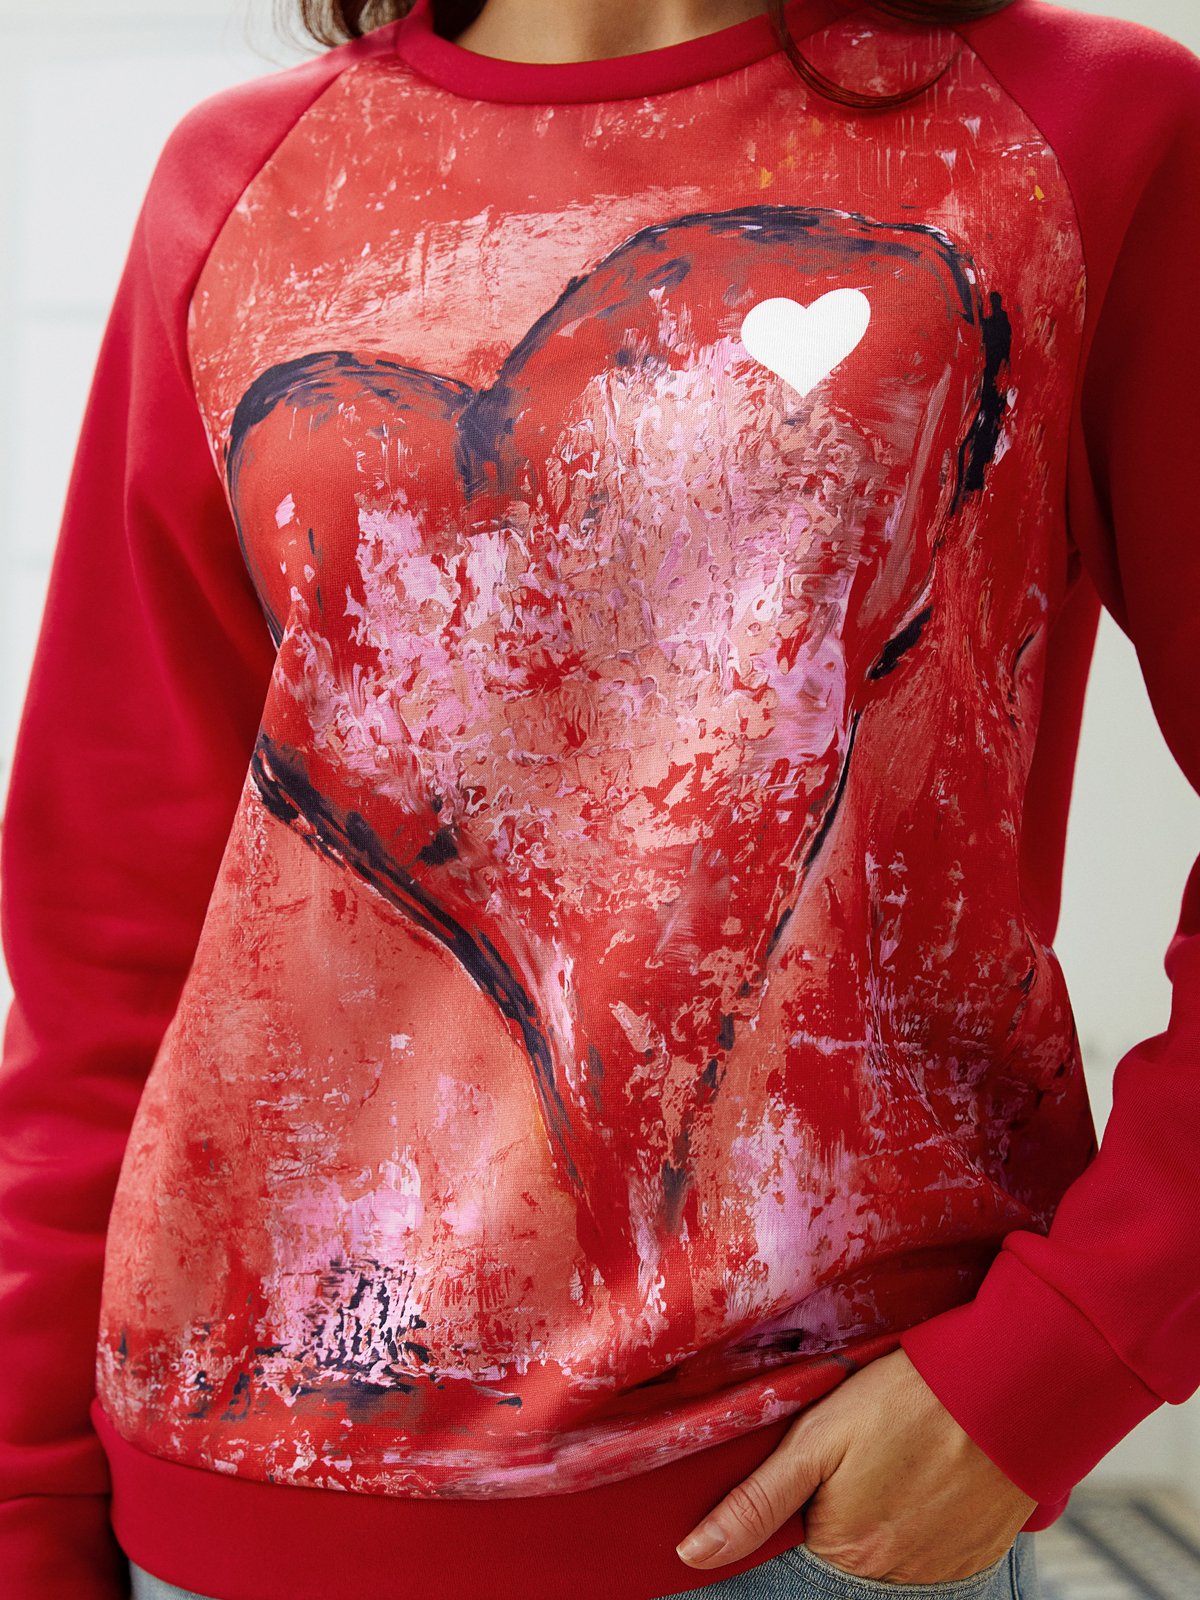 Women's Pullovers Casual Heart-shaped Color Block Long Sleeve Round Neck Pullovers